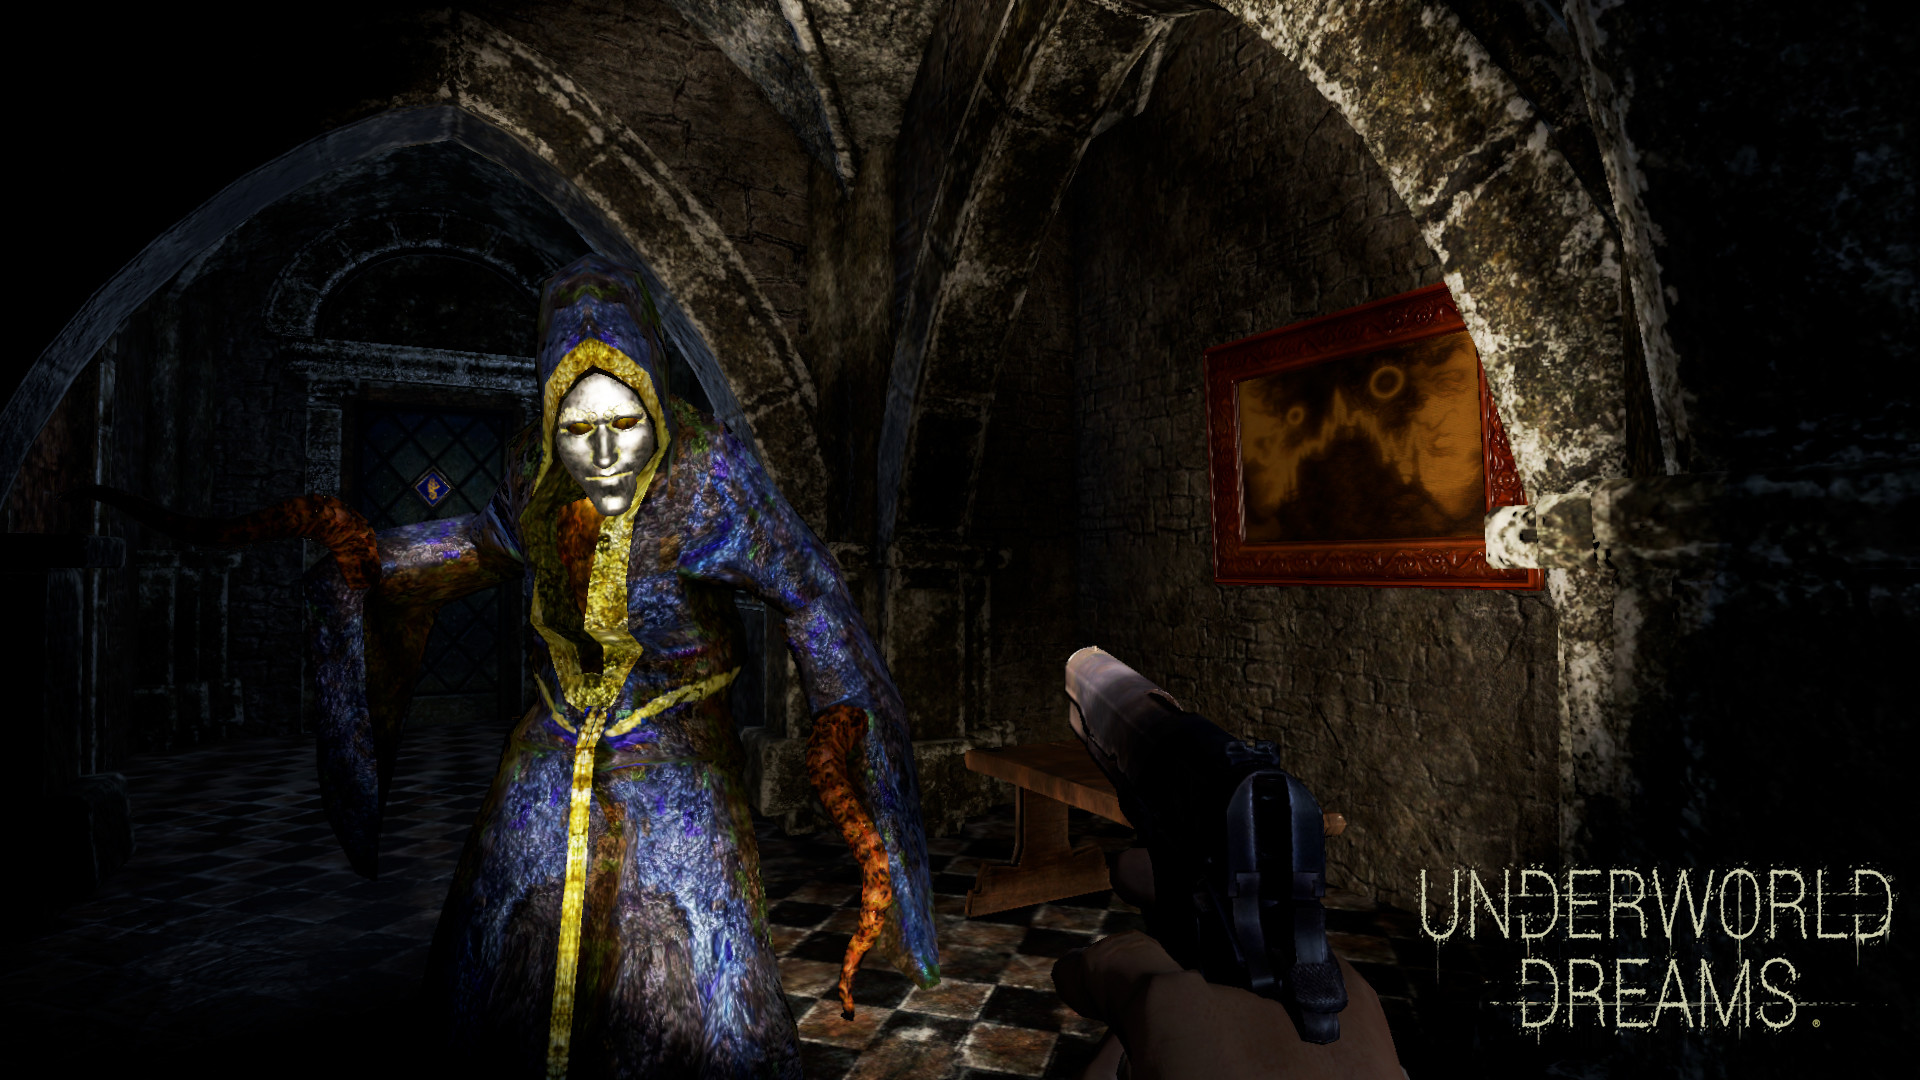 Underworld Dreams: The False King launches in 2022